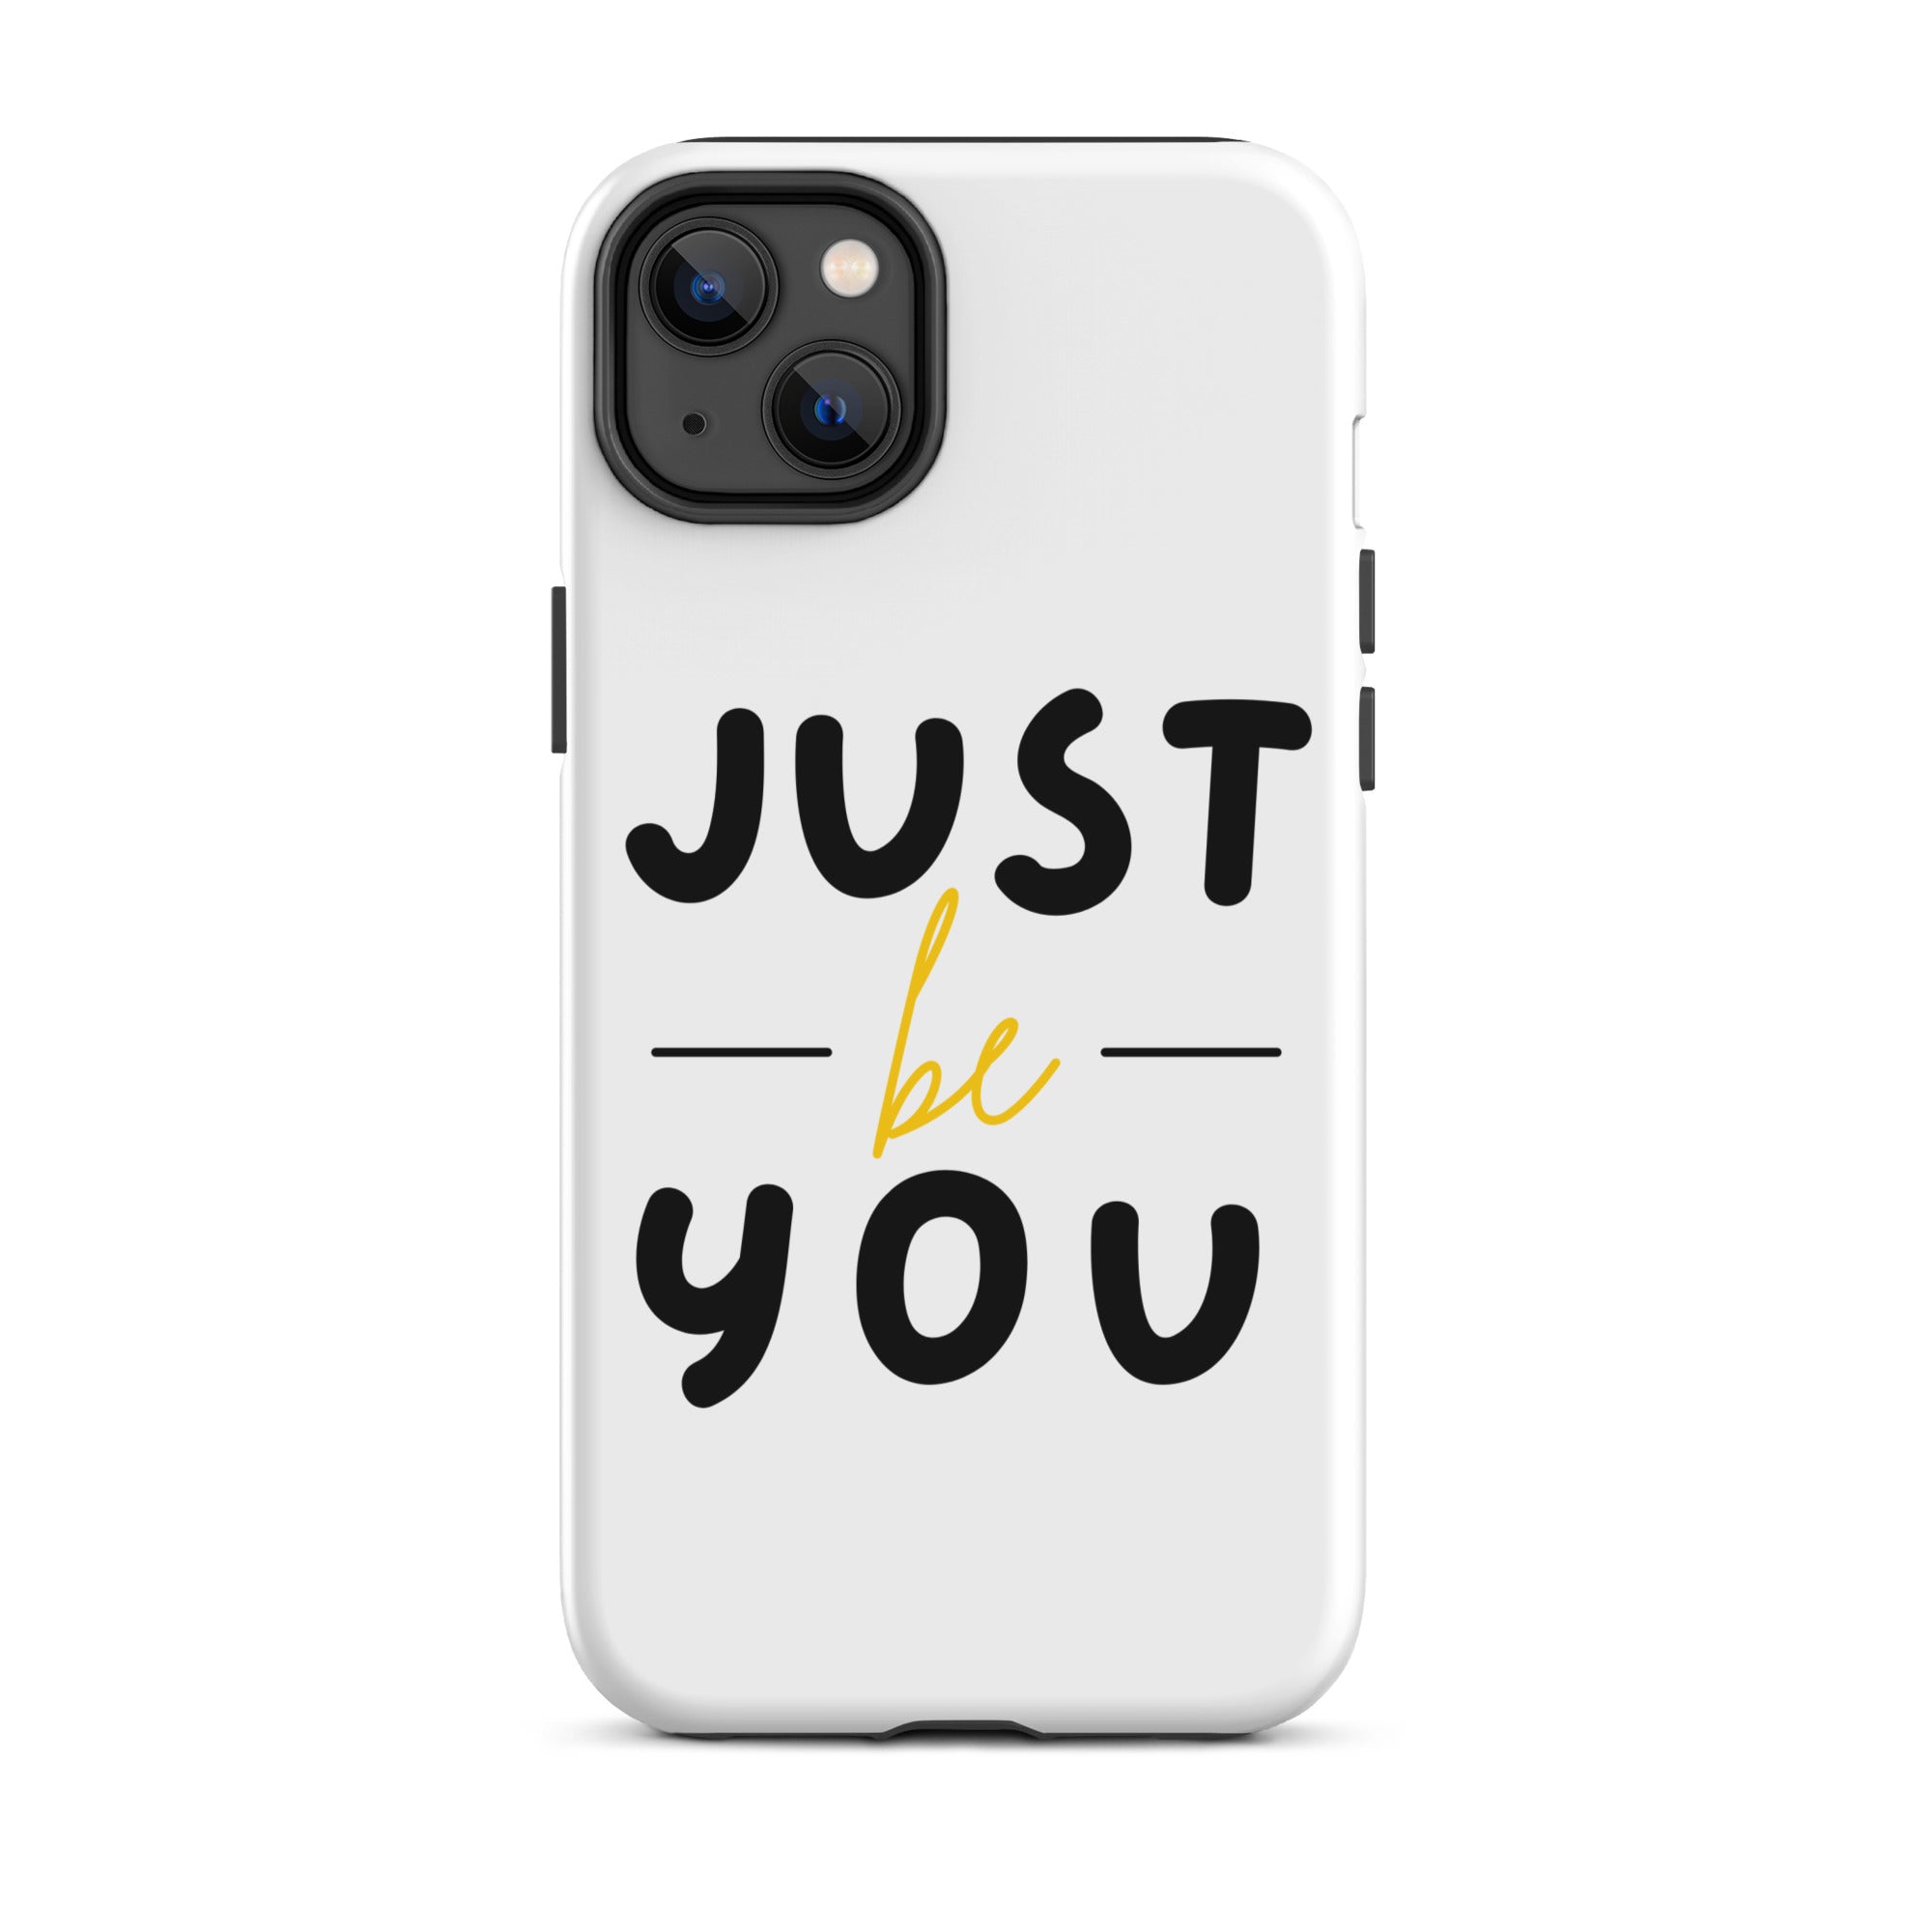 Just Be You - Tough iPhone case